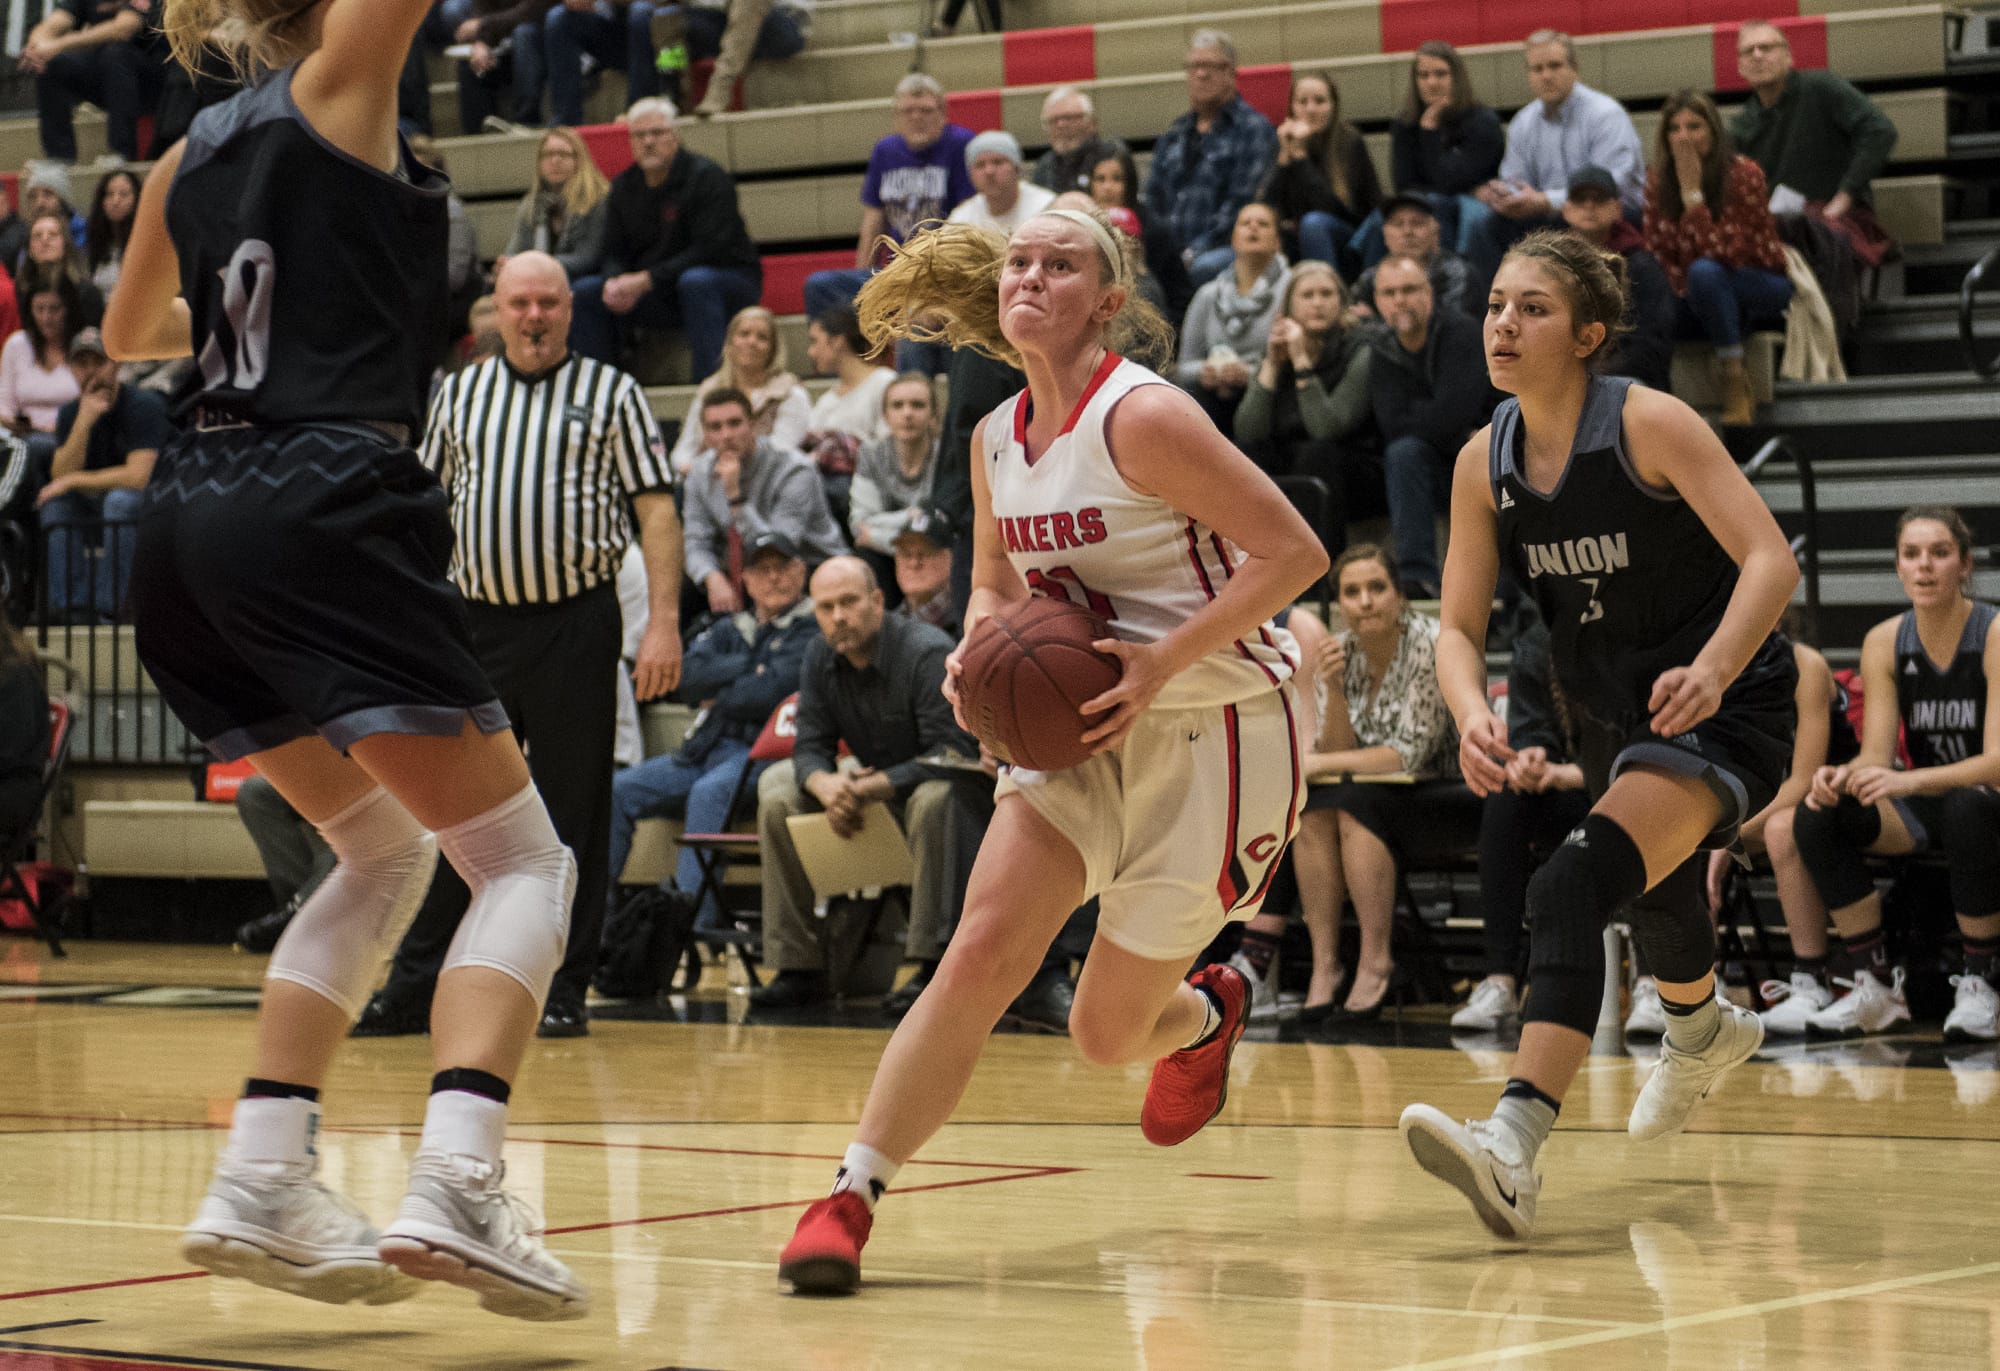 Camas' Haley Hanson (11) eyes the basket for a shot during Tuesday night's game at Camas High School on Jan. 9, 2018, in Camas.